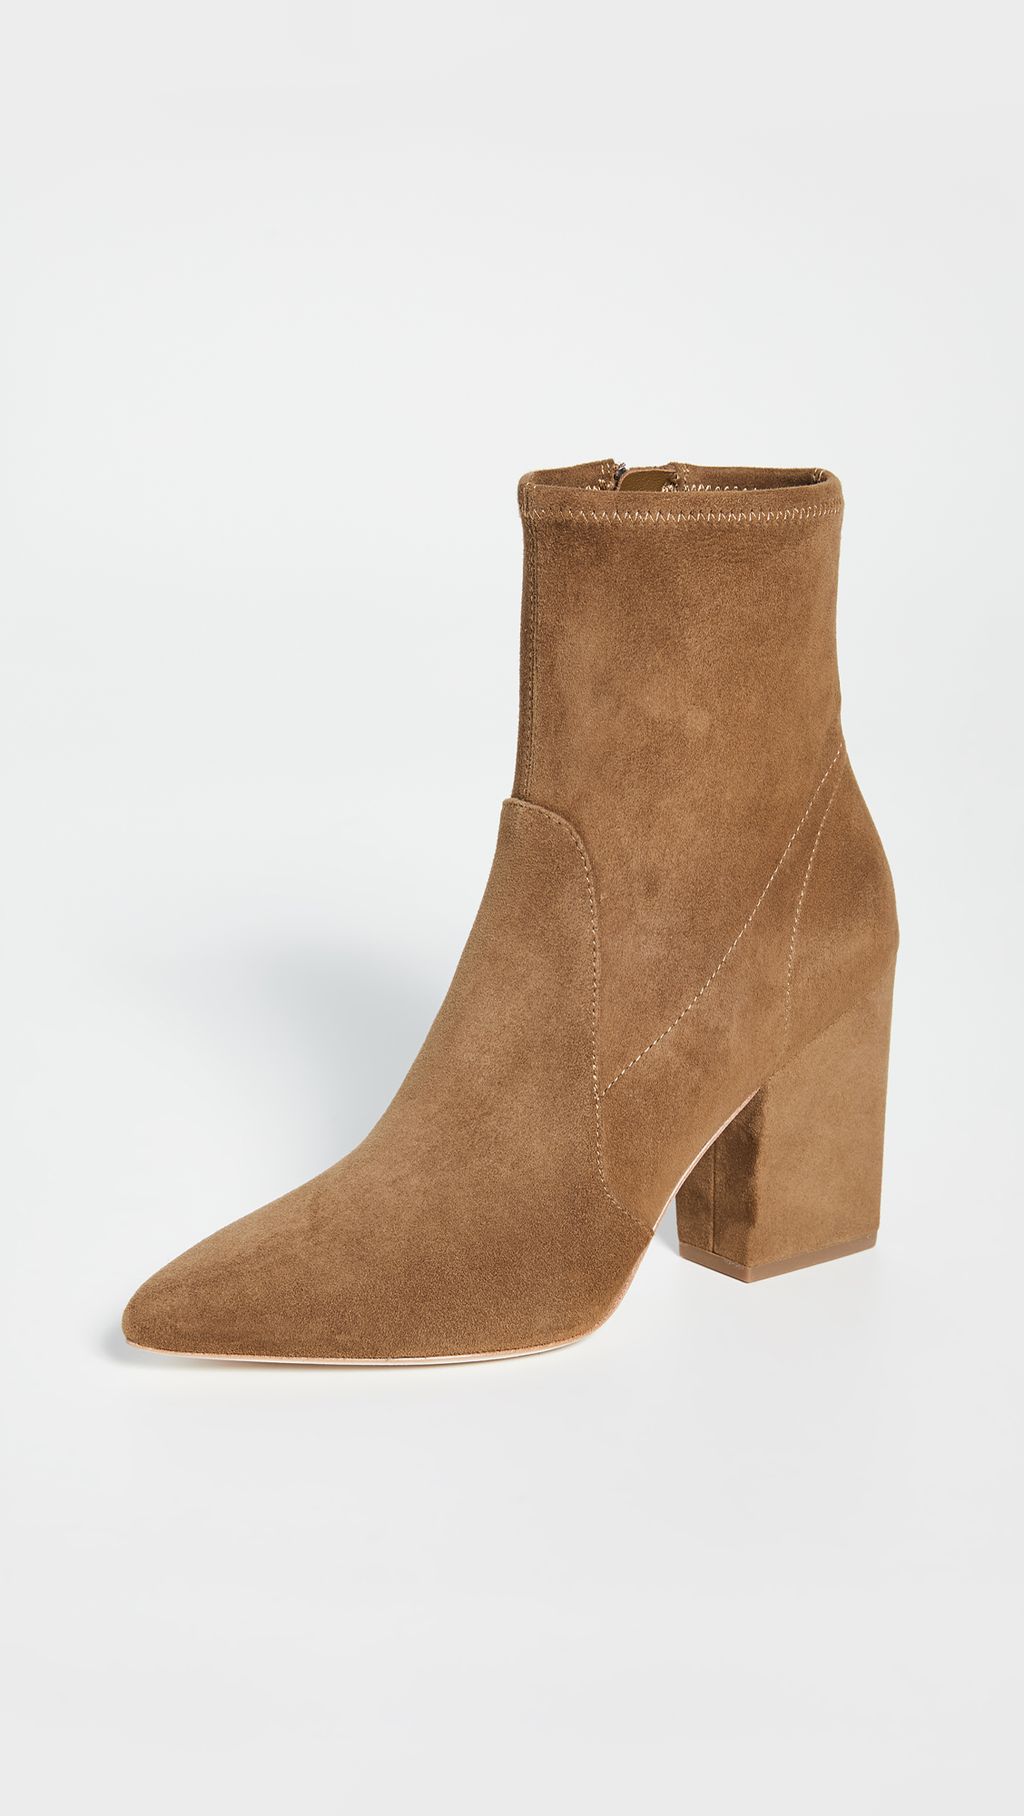 The 29 Best Suede Boots for Women | Who What Wear